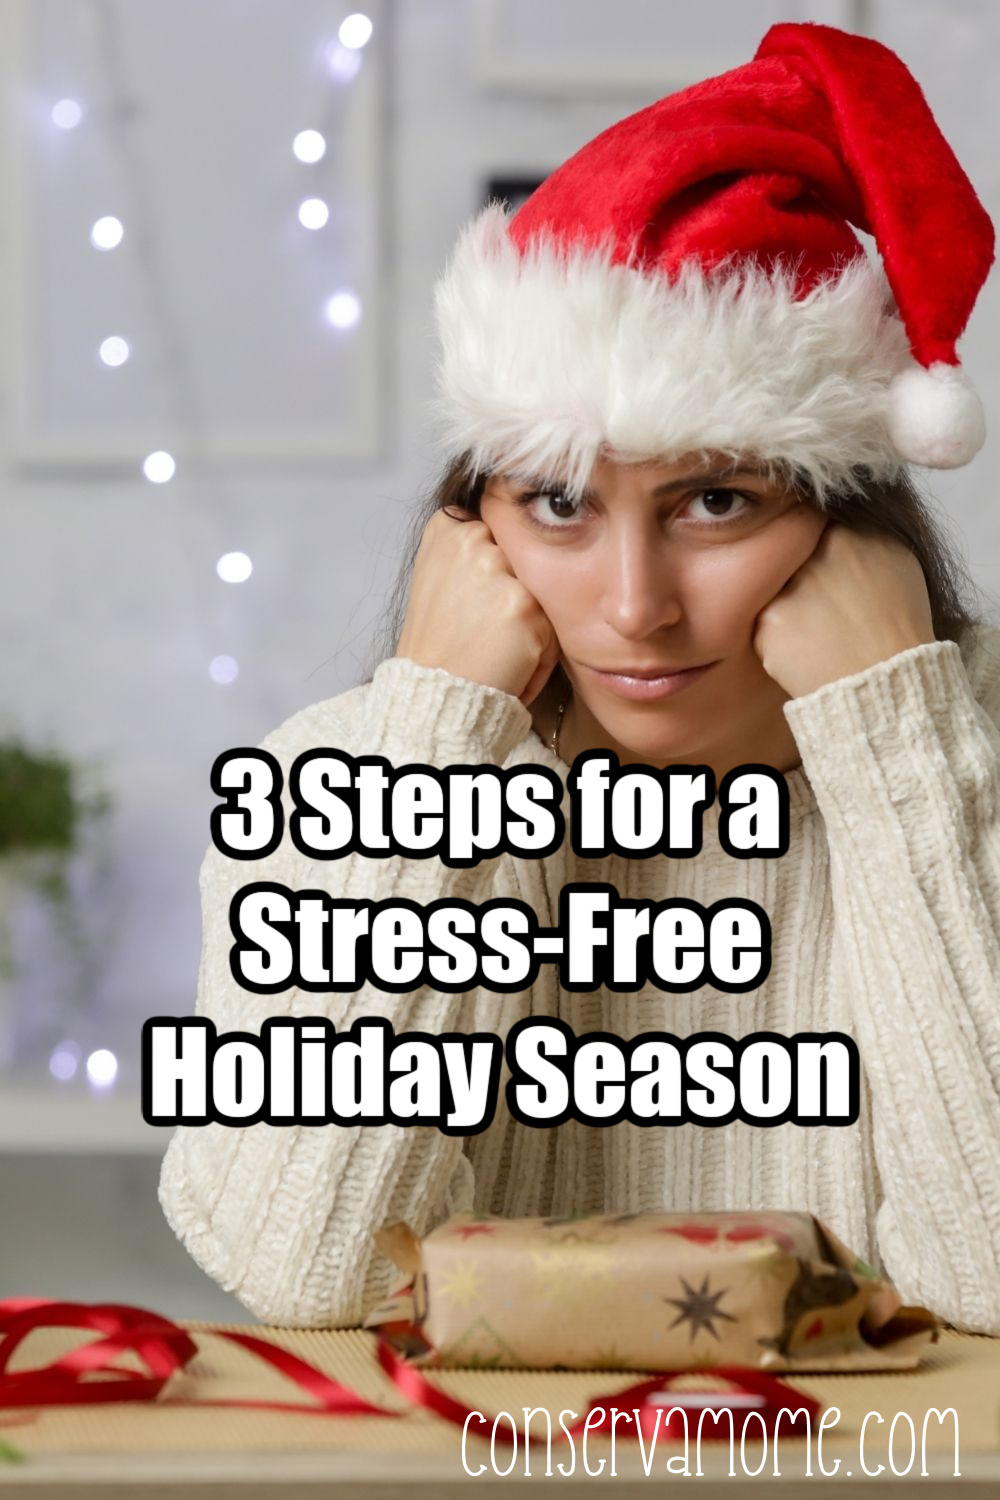 3 Steps for a Stress-Free Holiday Season